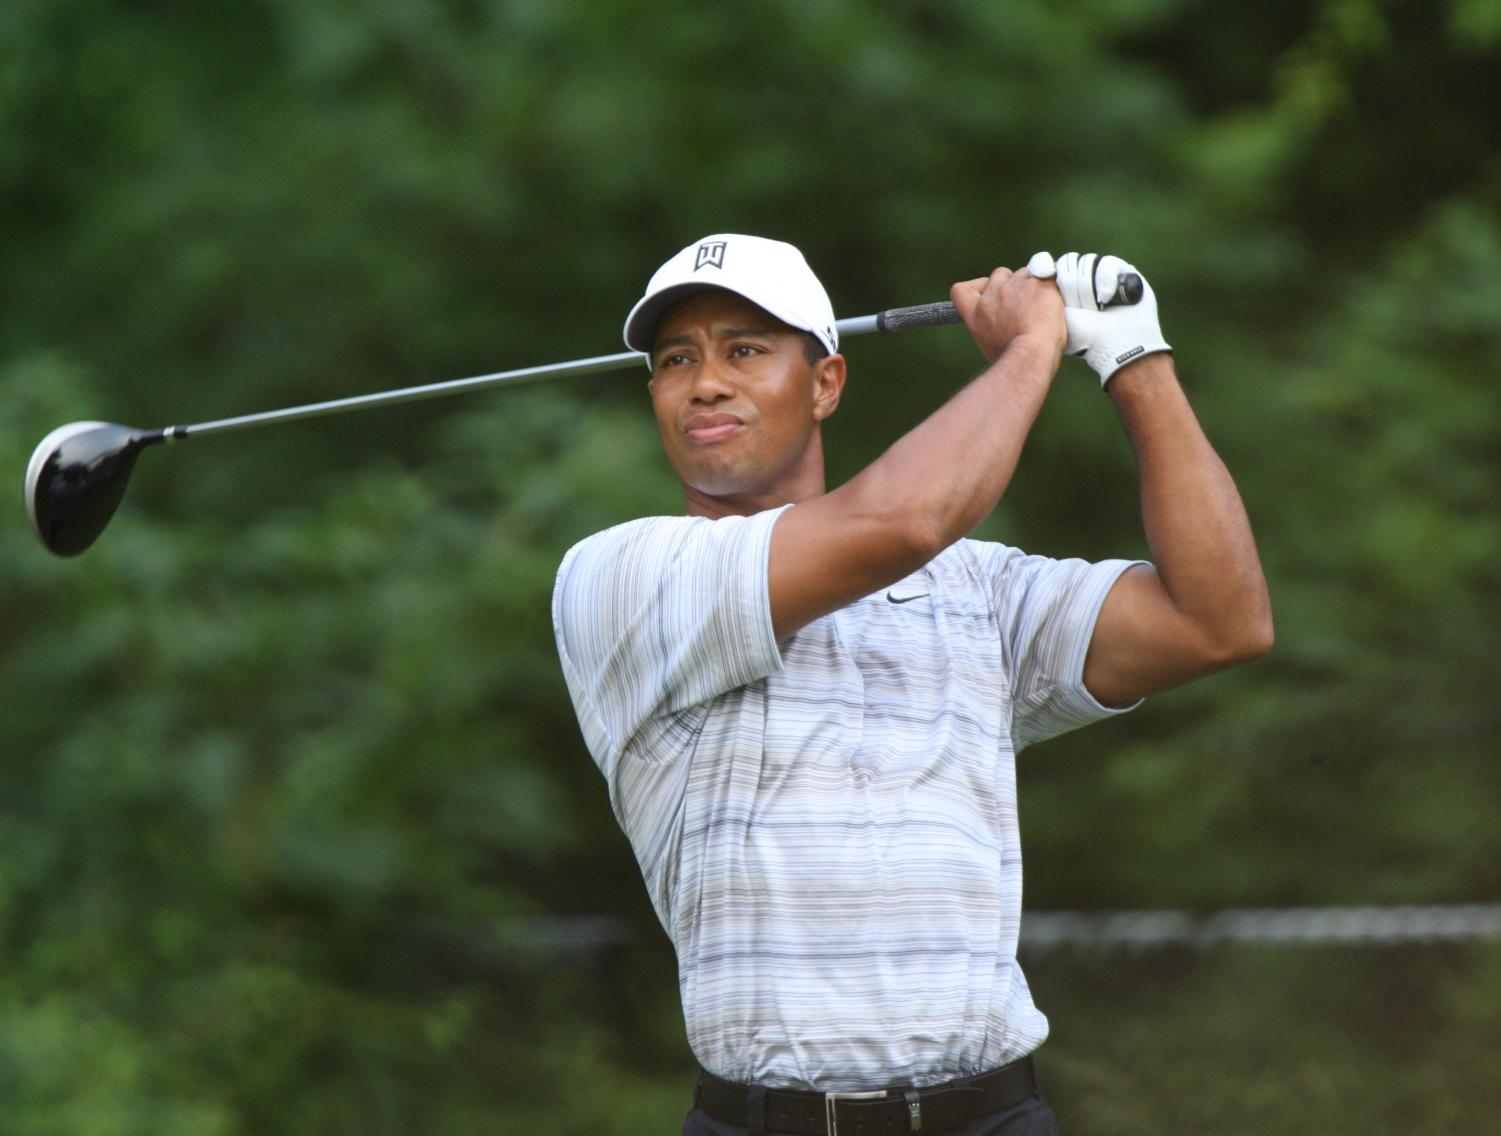 The Minnesota Republic | Tiger Woods involved in rollover car crash